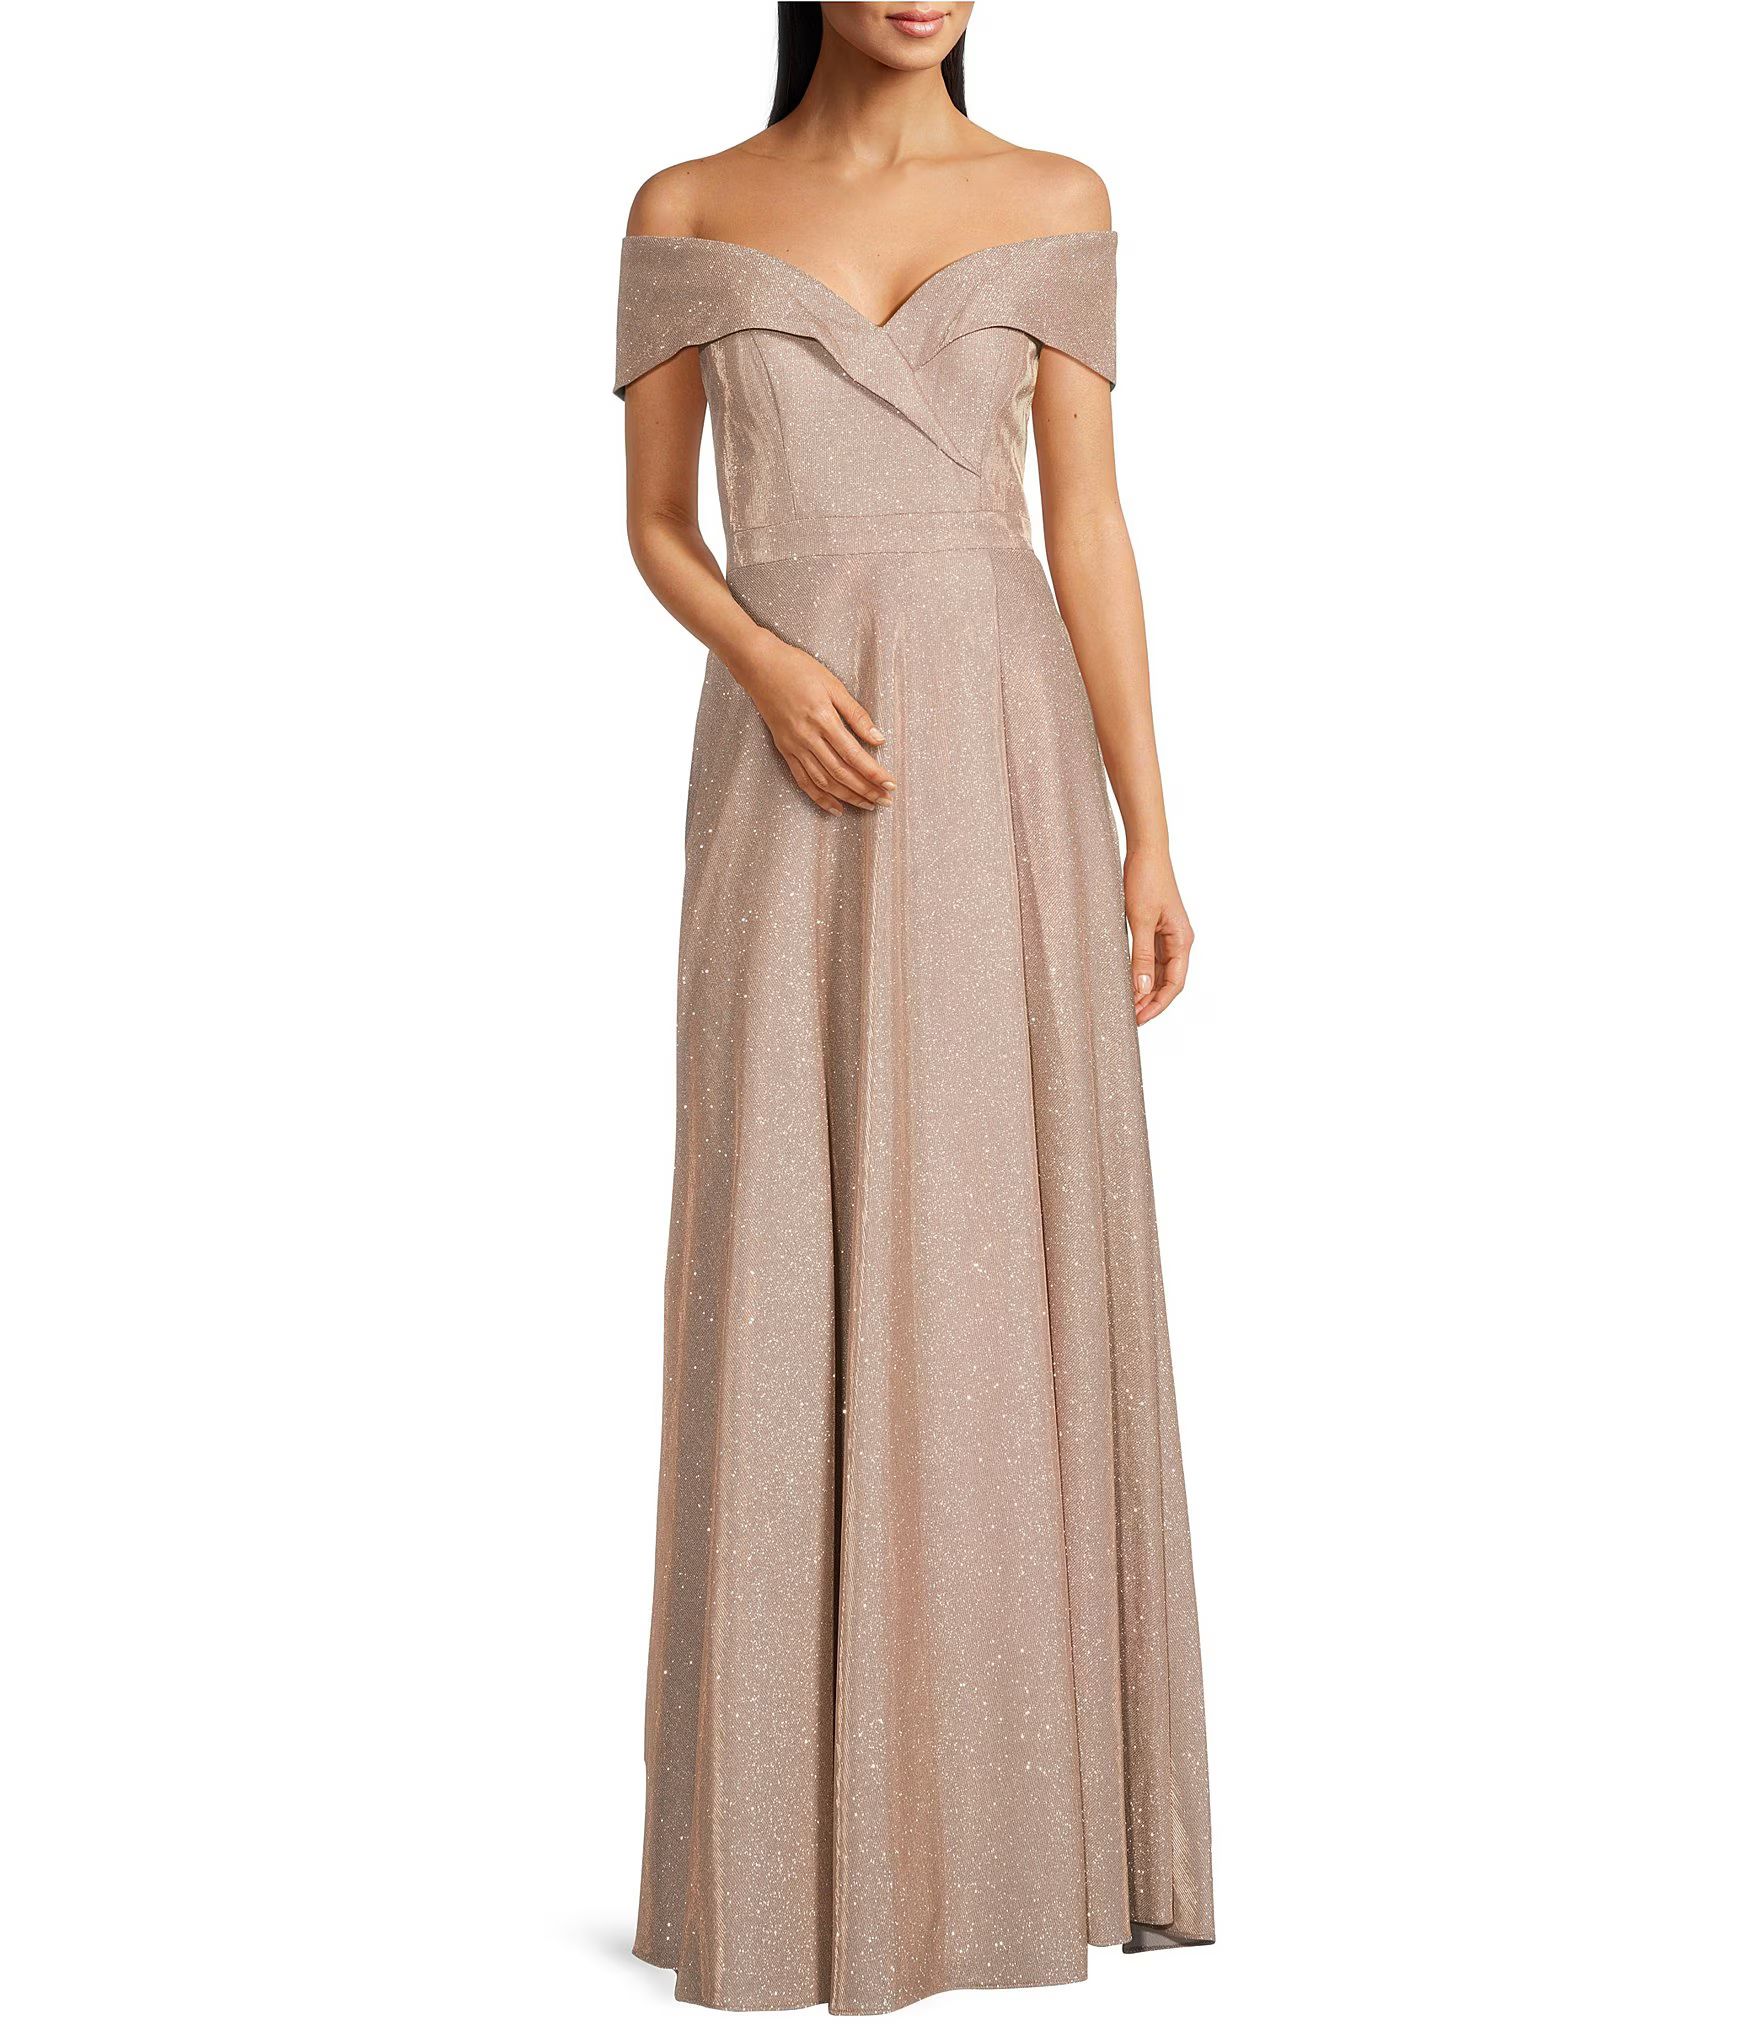 Off-the-Shoulder Short Sleeve Sweetheart Neck Thigh High Slit Pleated Glitter Gown | Dillard's